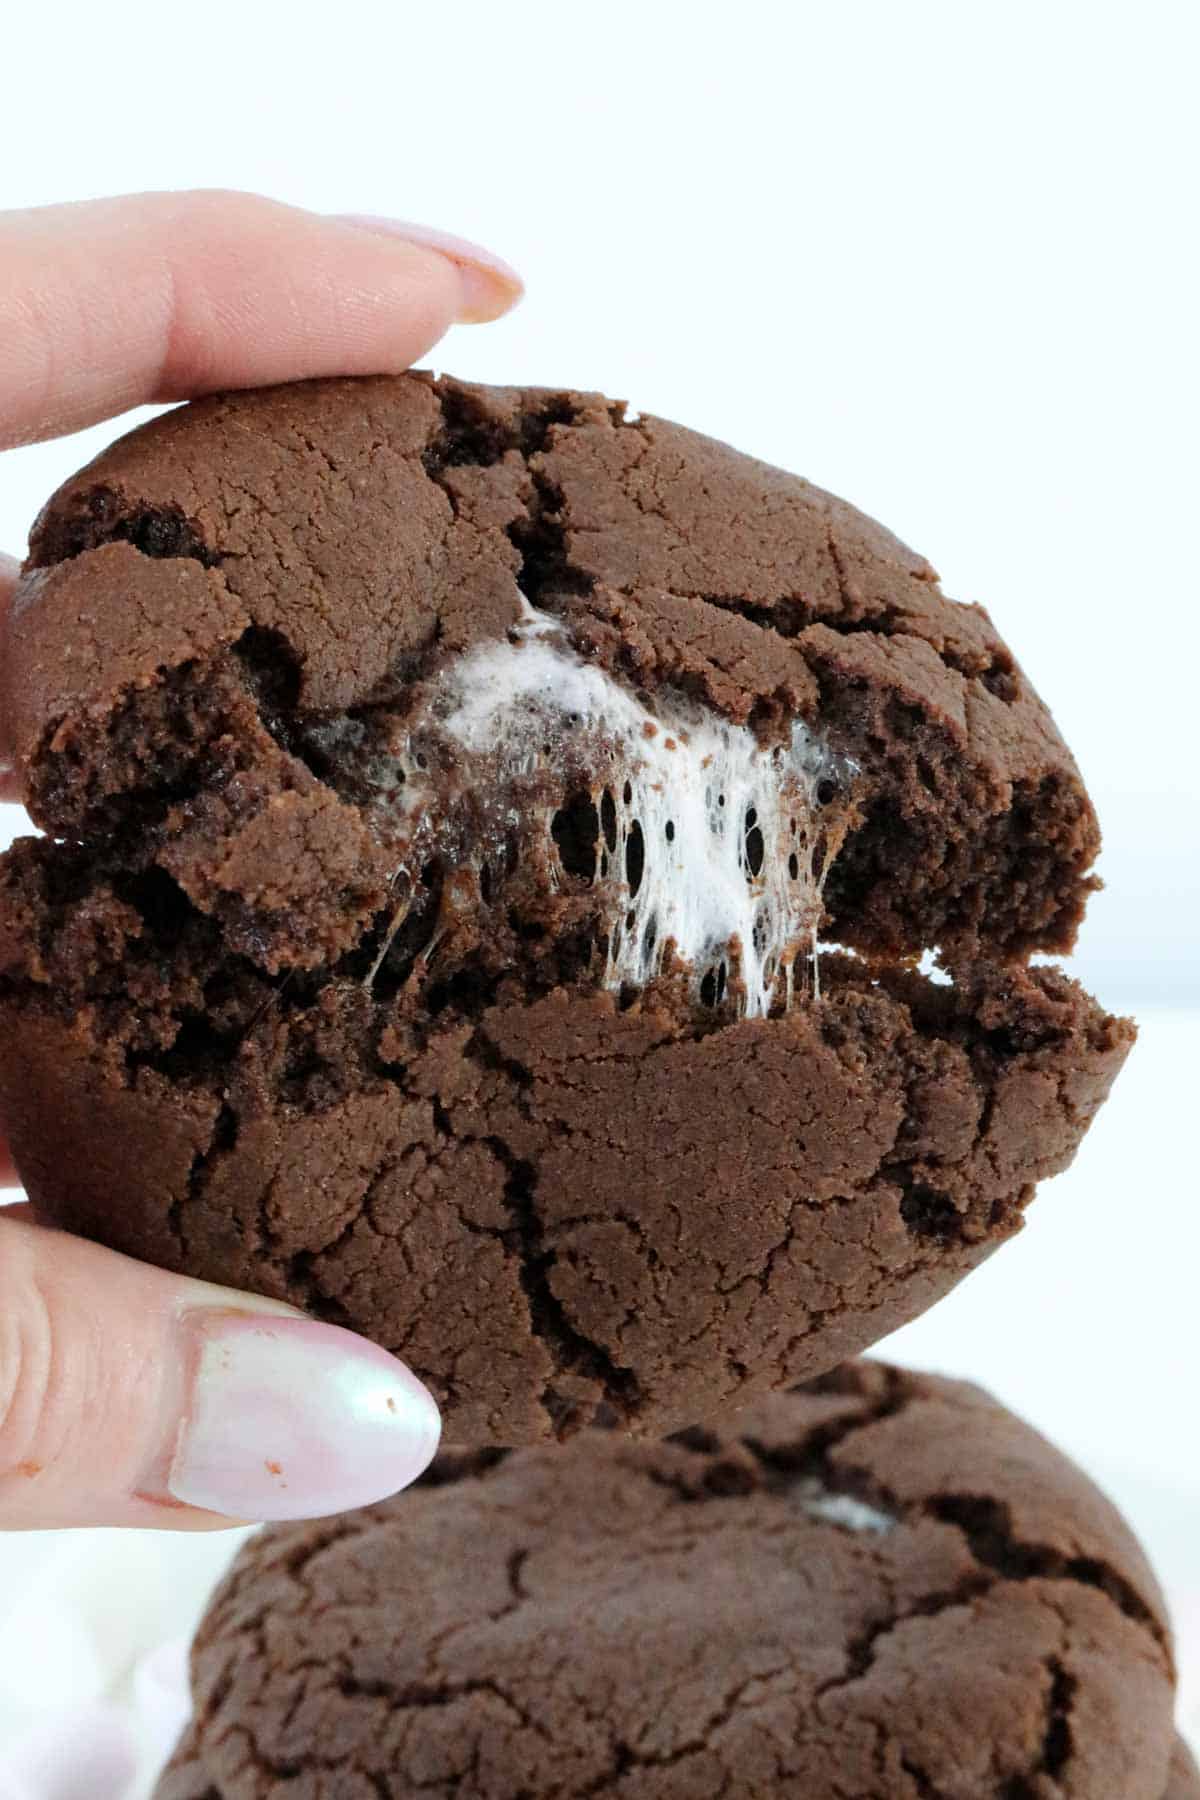 A hand breaking a chocolate cookie in half to show the chewy marshmallow centre.